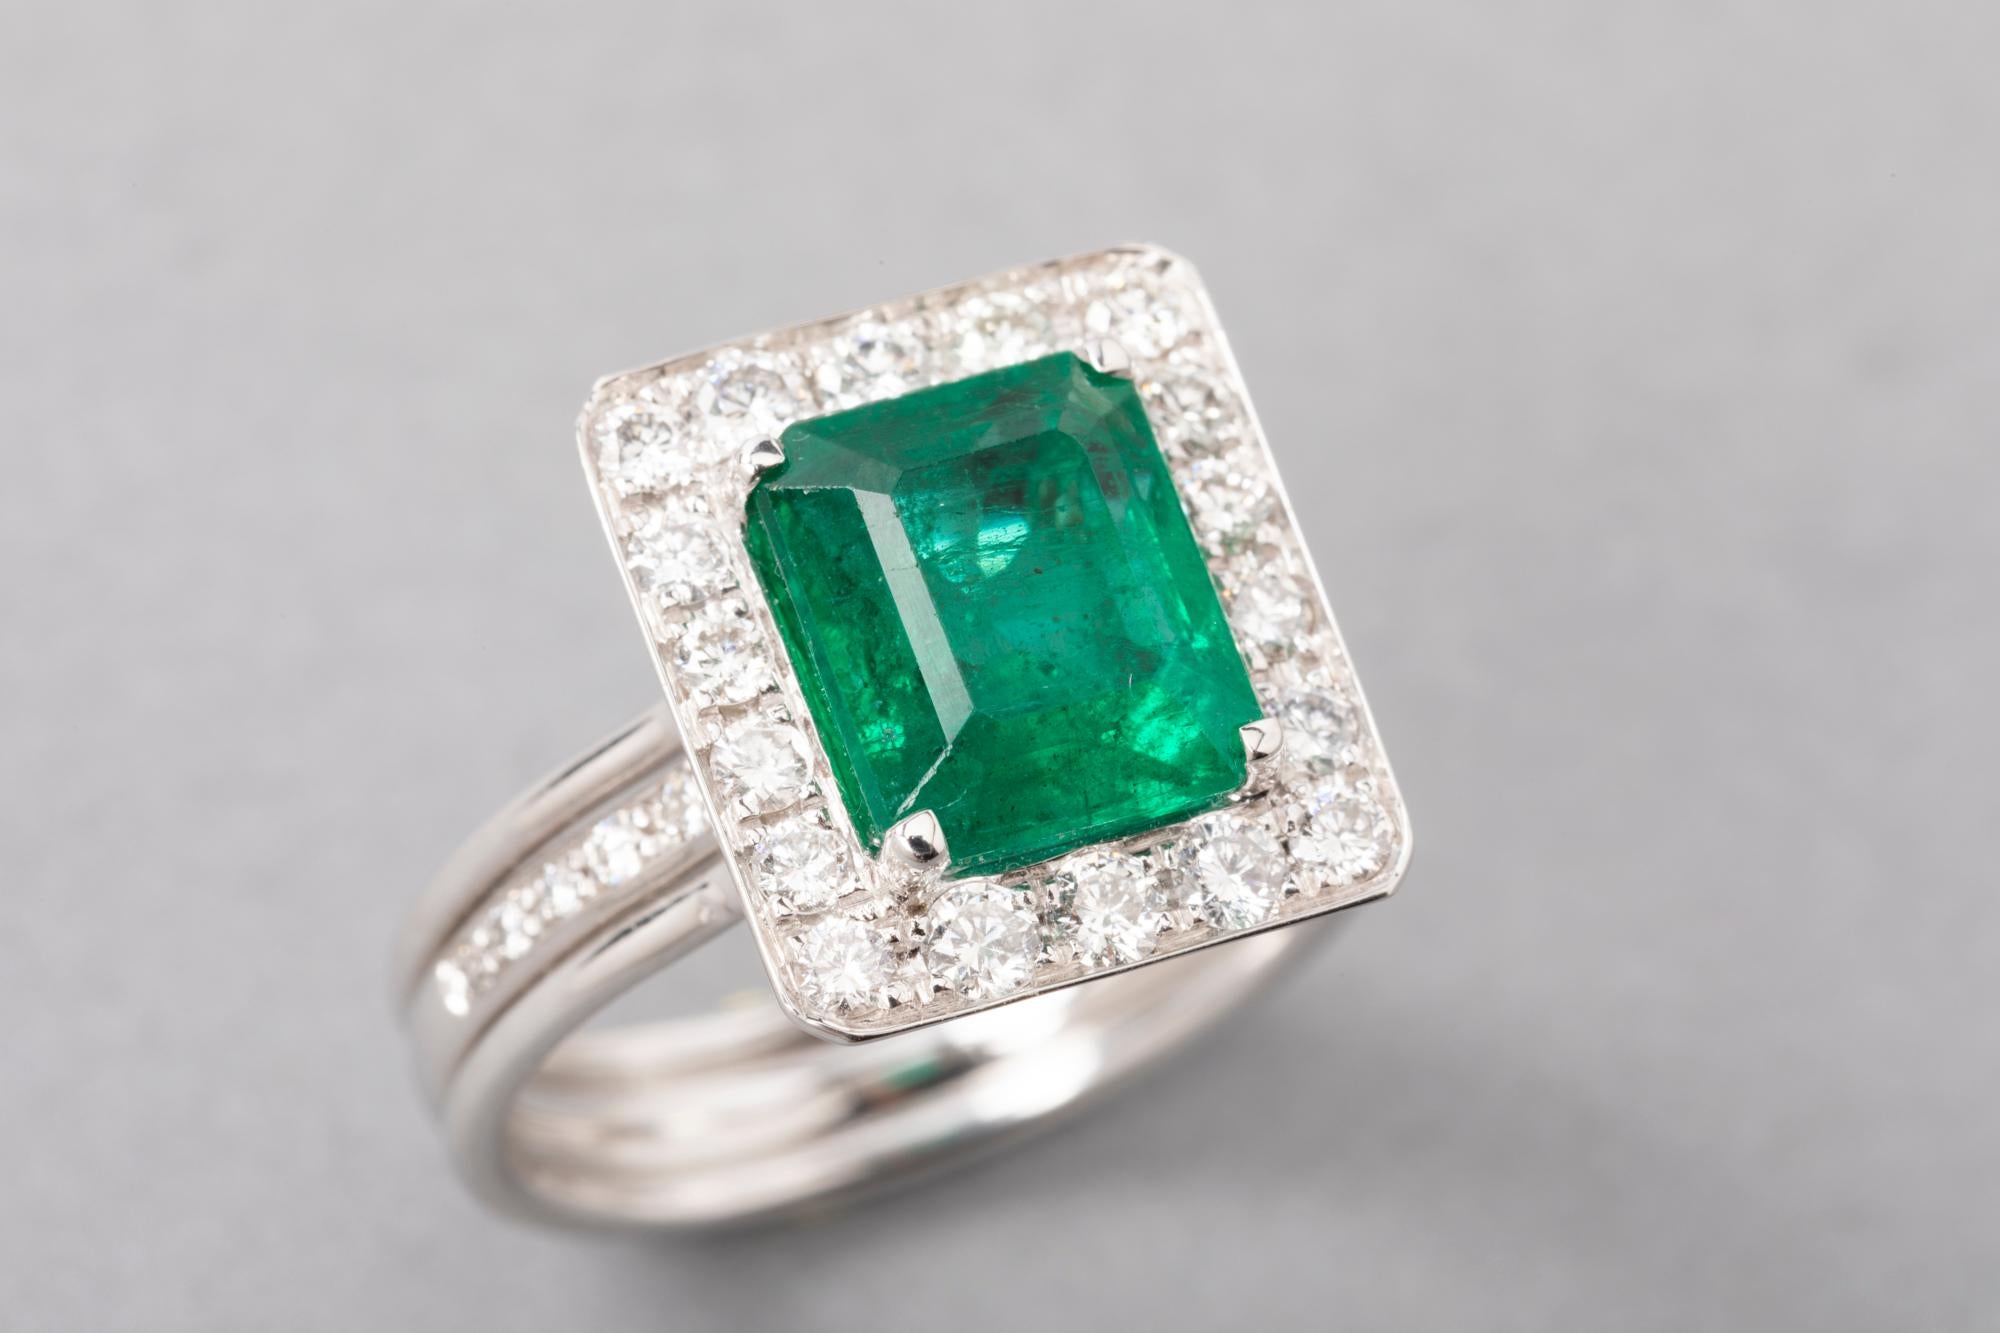 Emerald Cut Certified 3.35 Carat Emerald French Ring For Sale